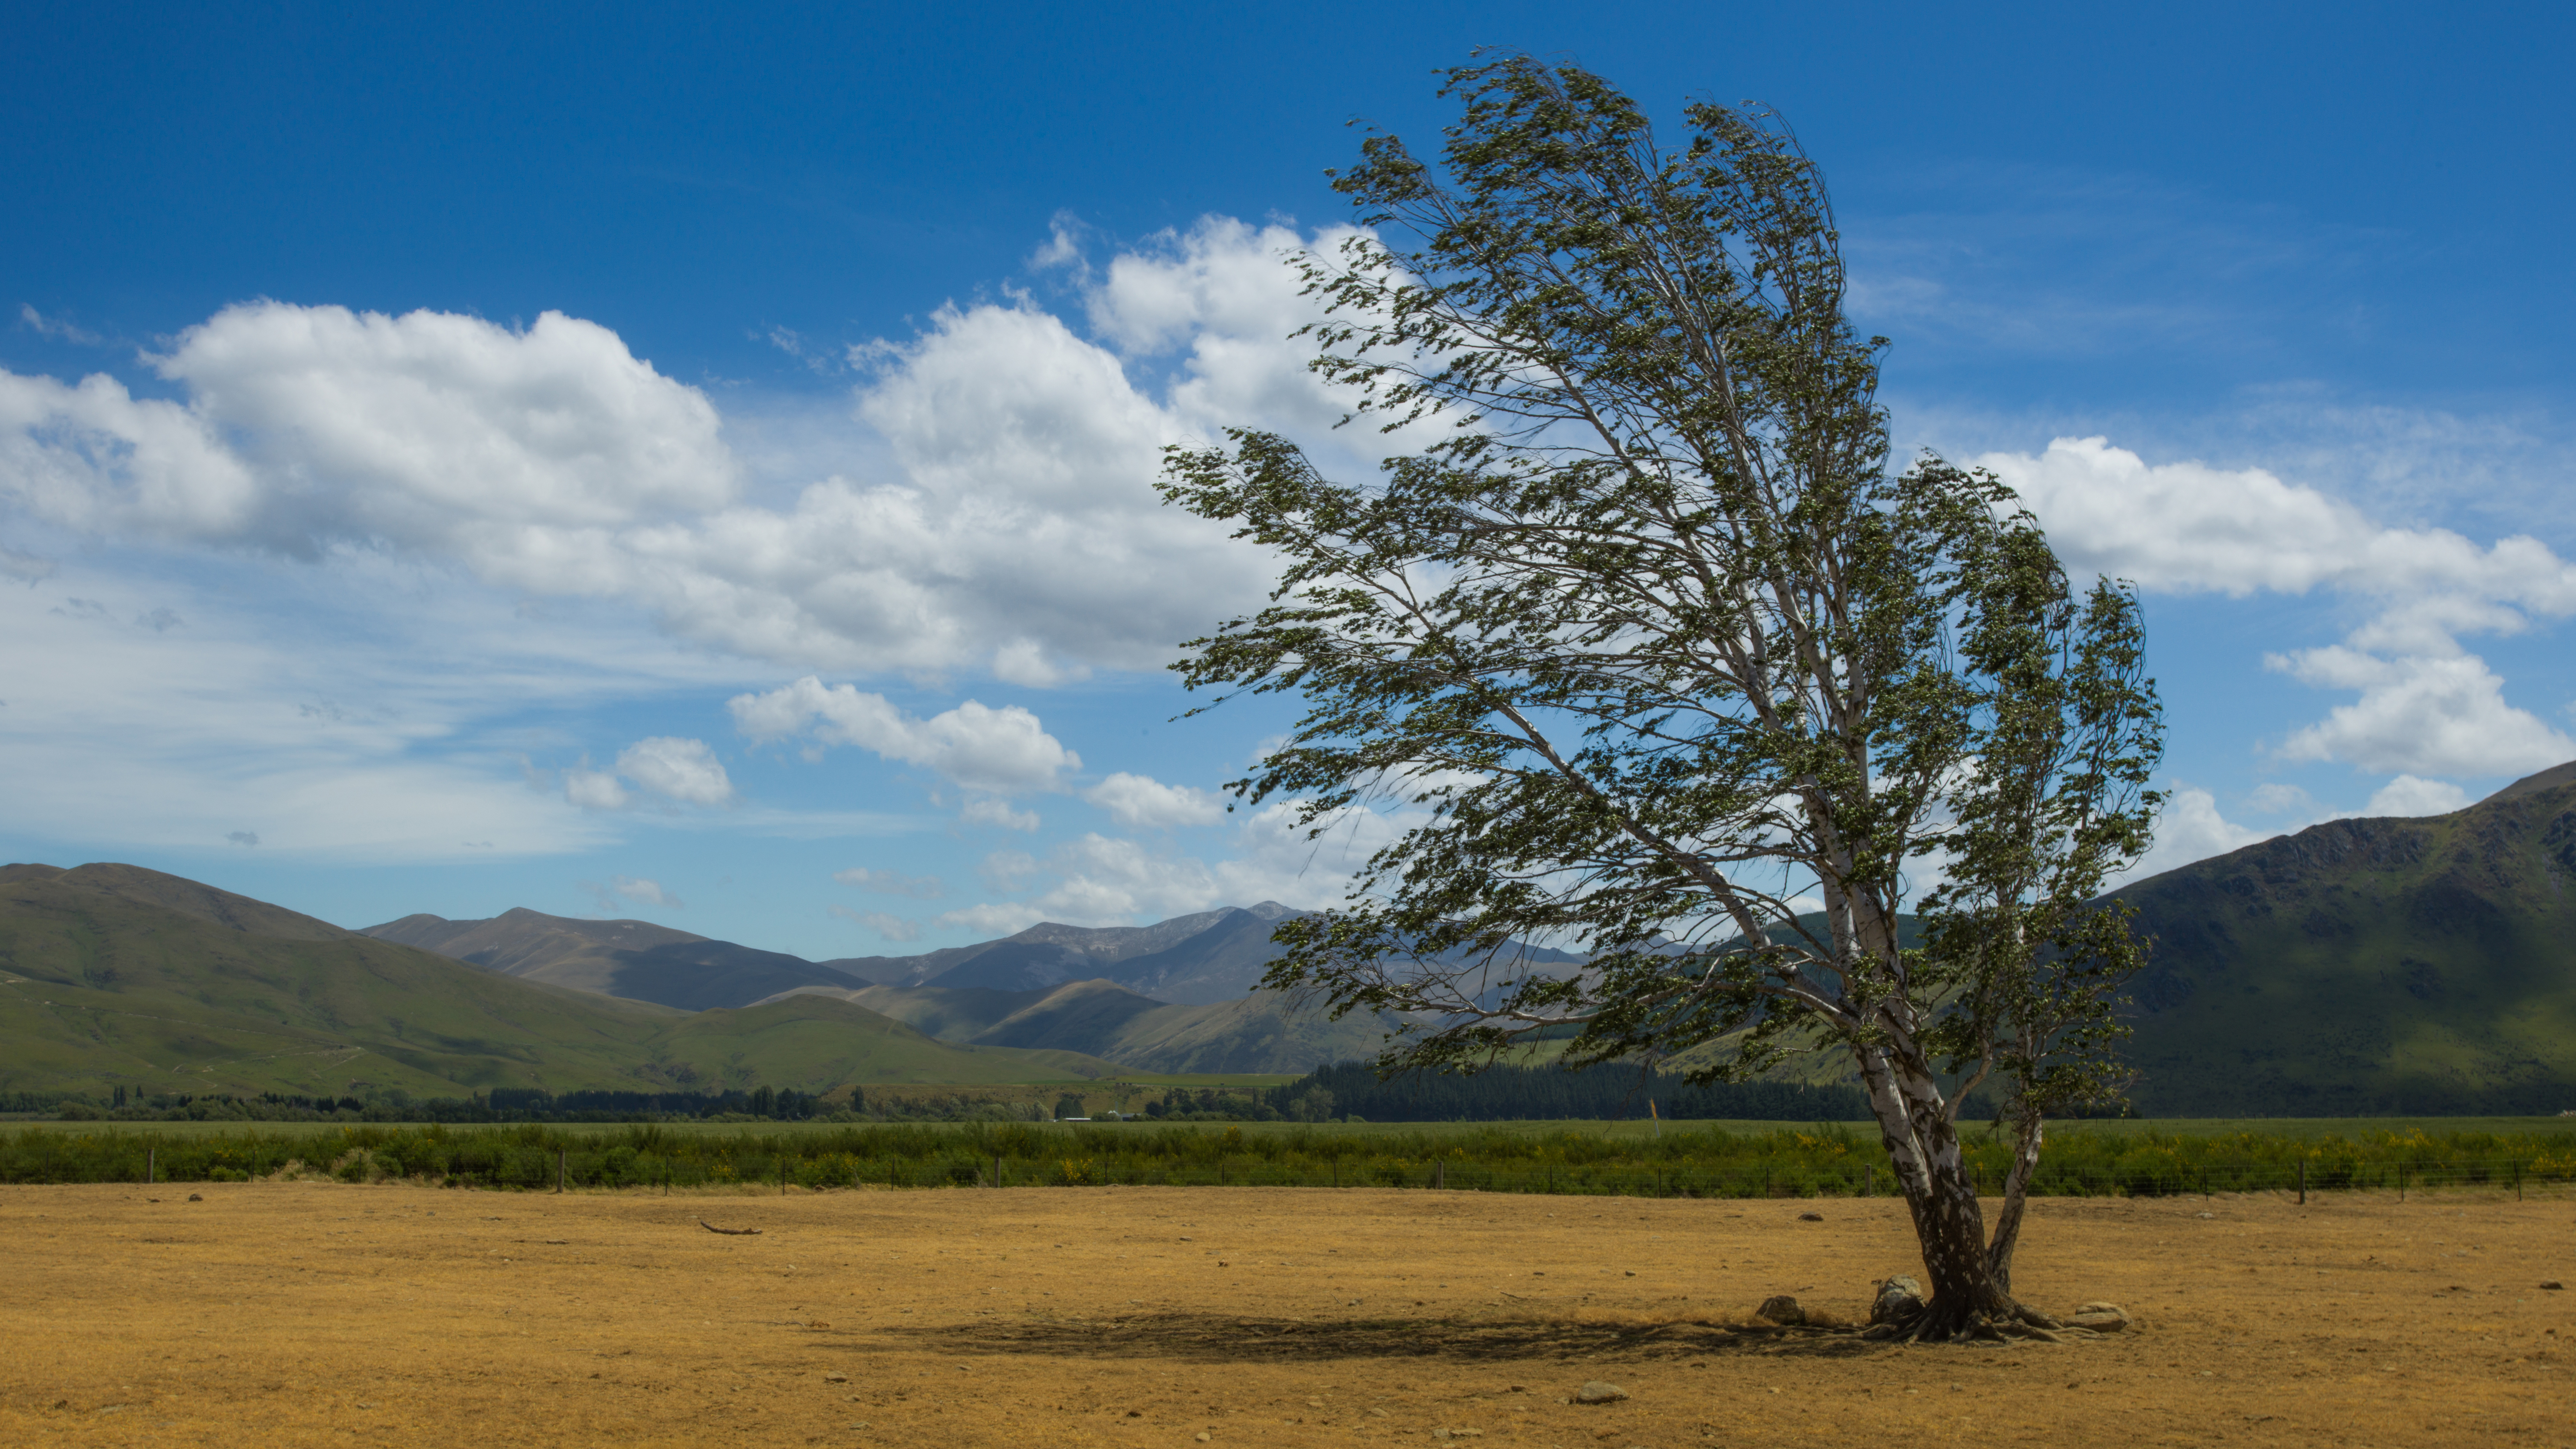 General 7680x4320 photography Trey Ratcliff landscape New Zealand mountains trees field nature clouds